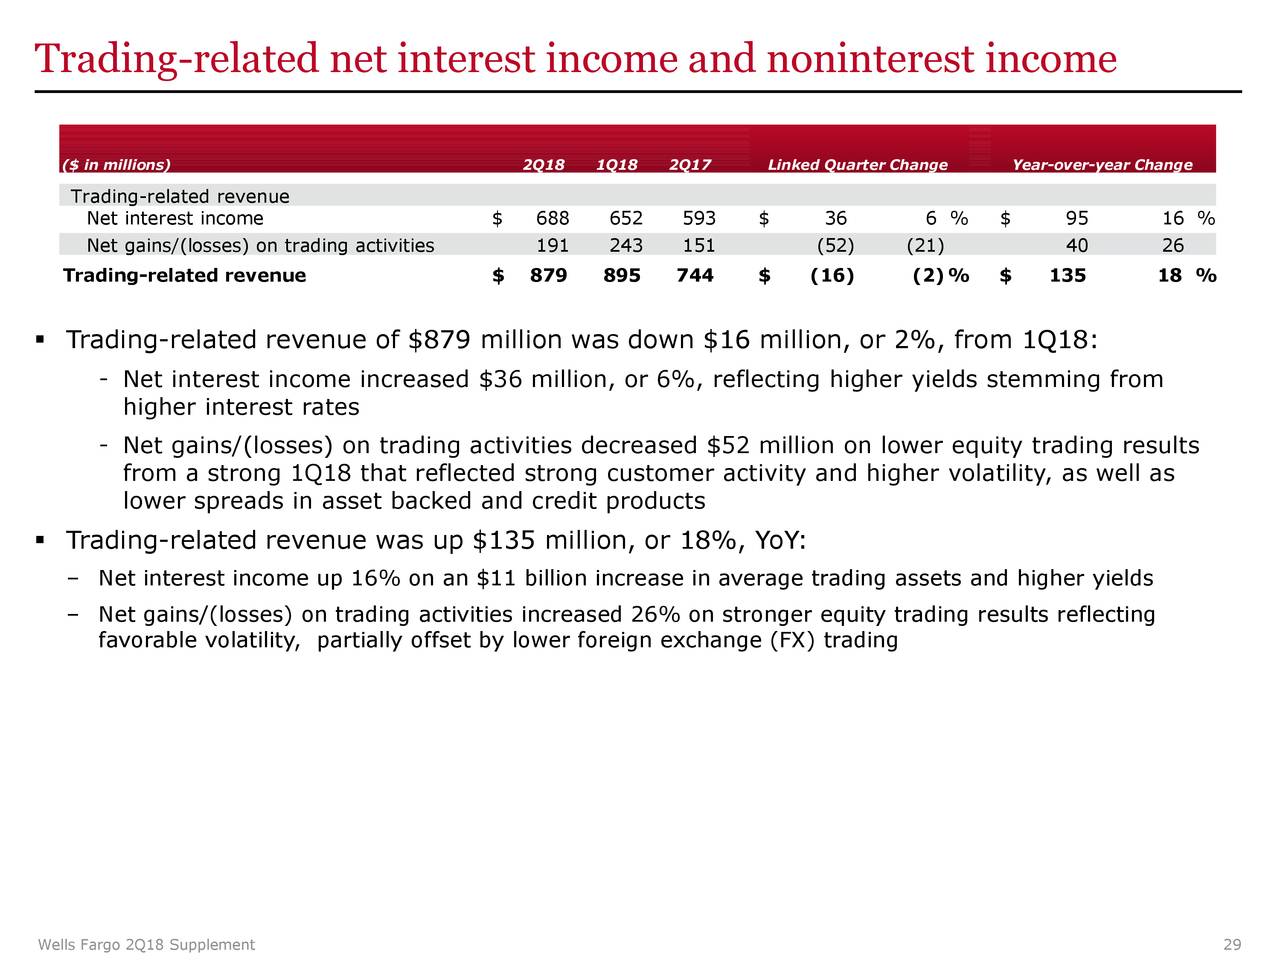 Trading-related net interest income and noninterest income